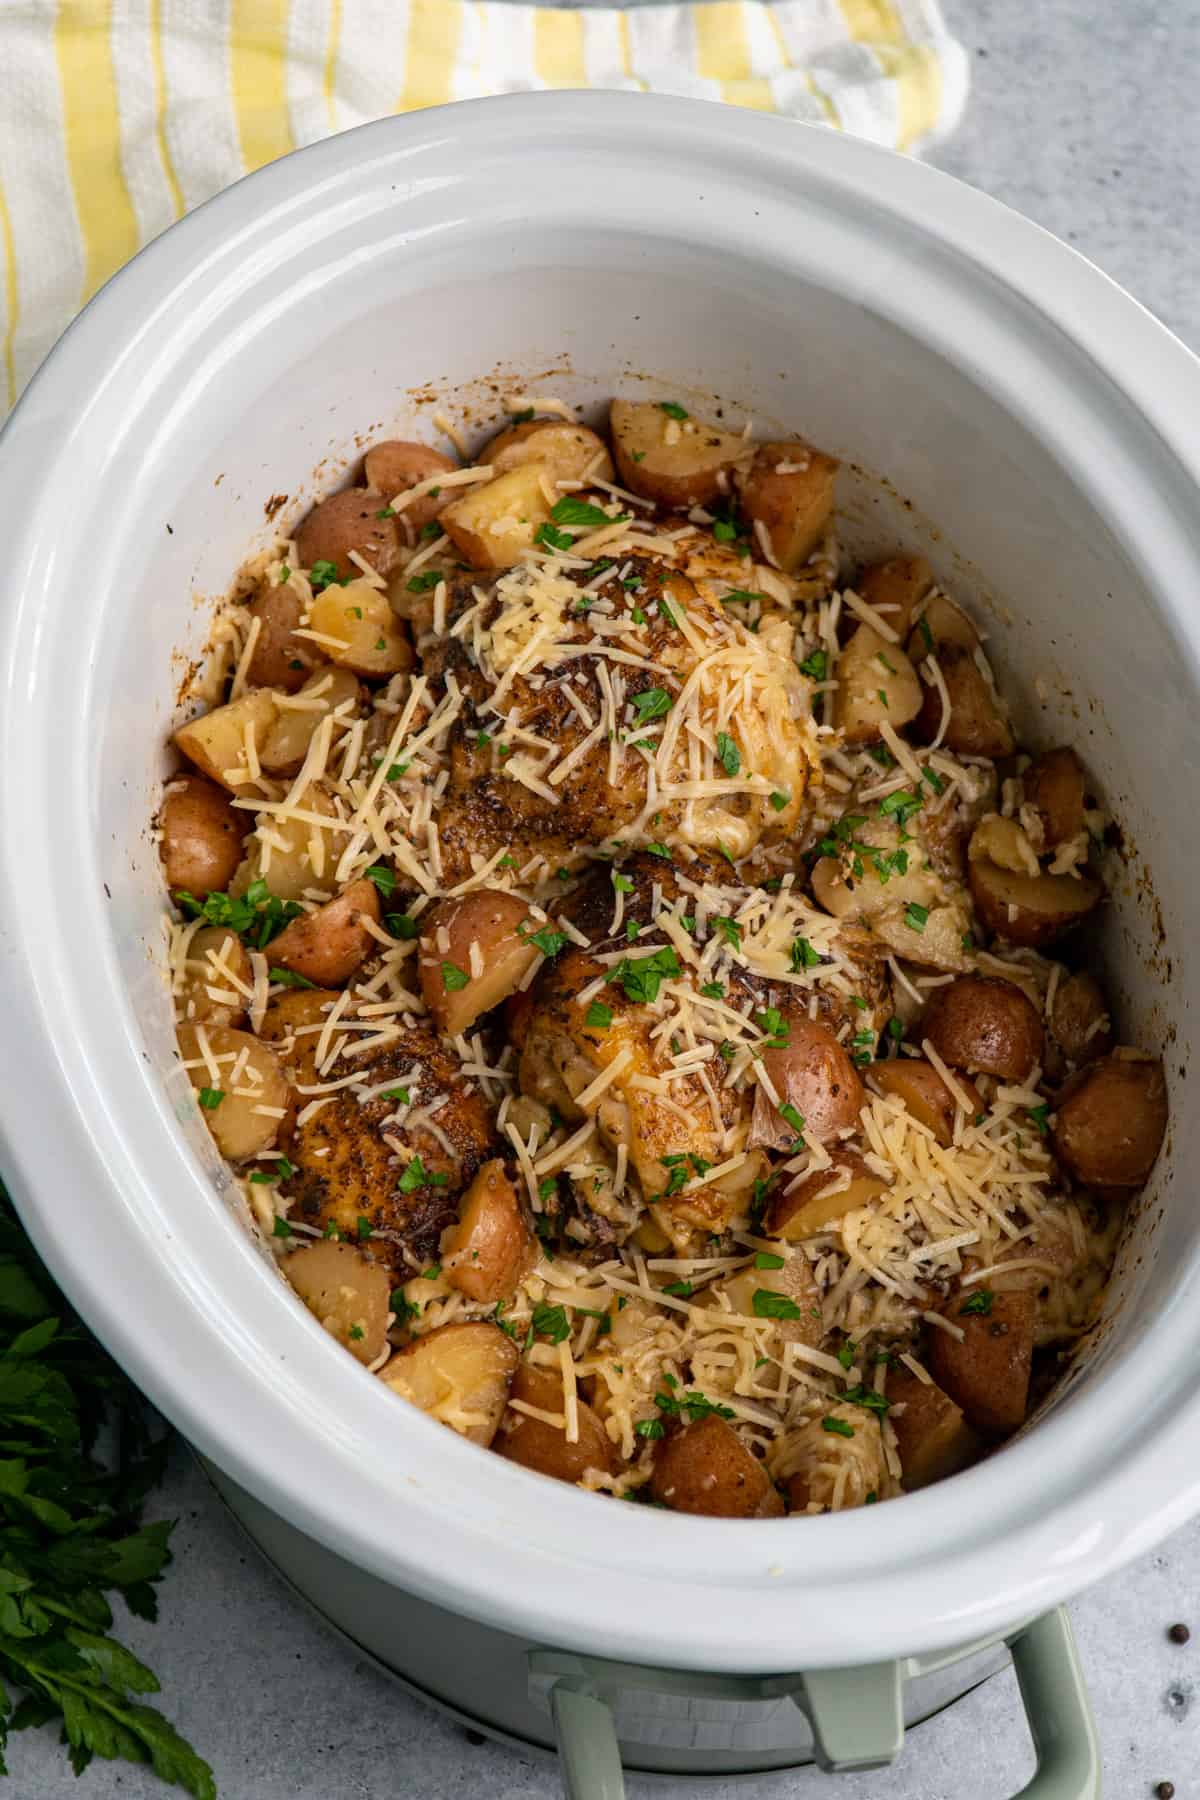 Over head look at slow cooker garlic parmesan chicken and potatoes in a crock pot.